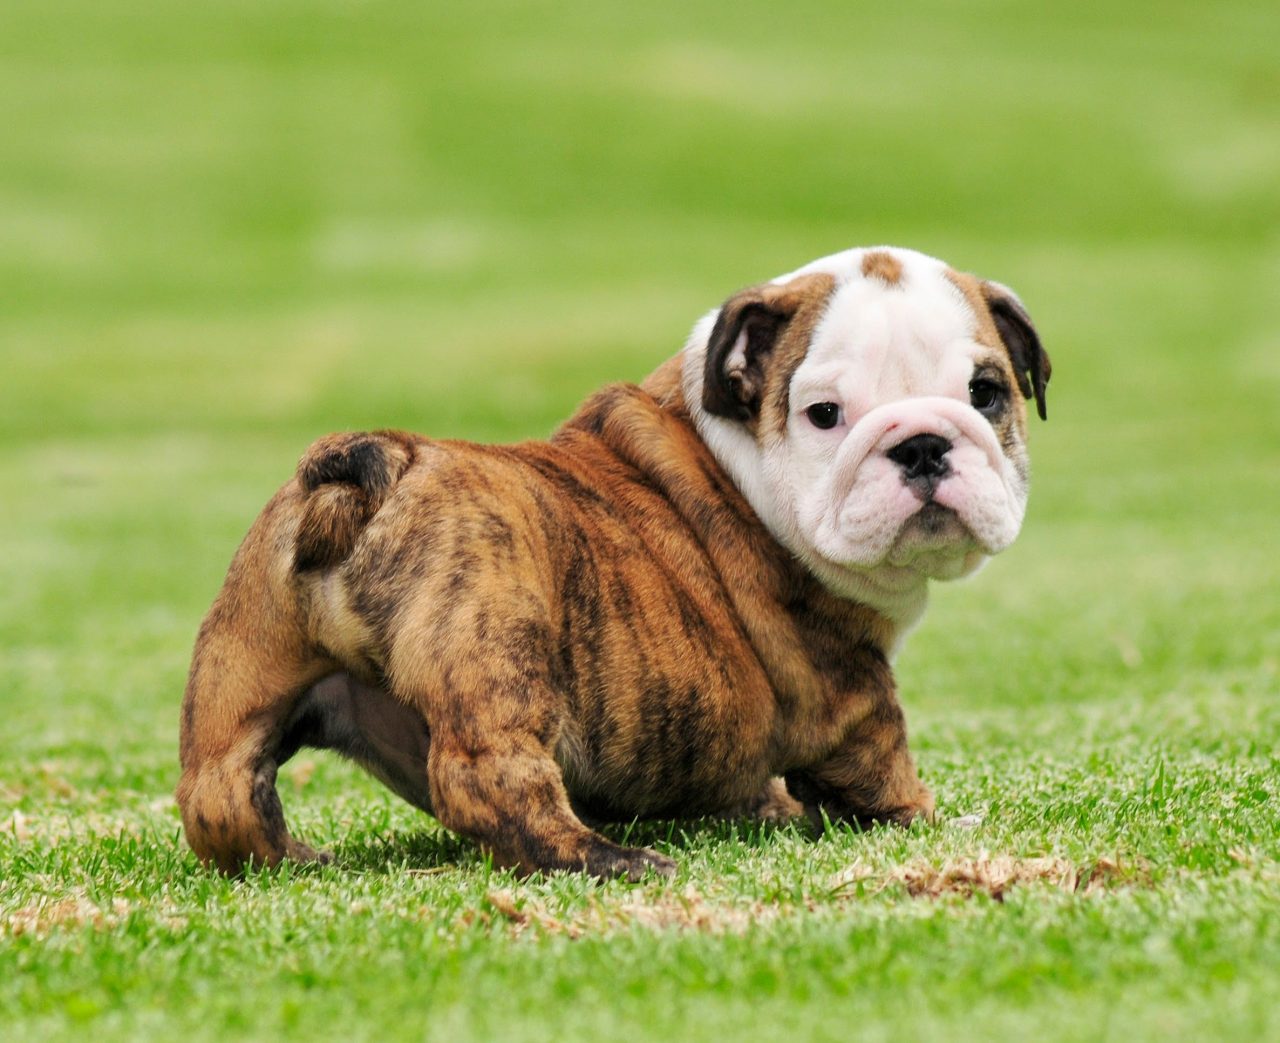 25 Beautiful Bulldog Puppies That Will Melt Your Heart